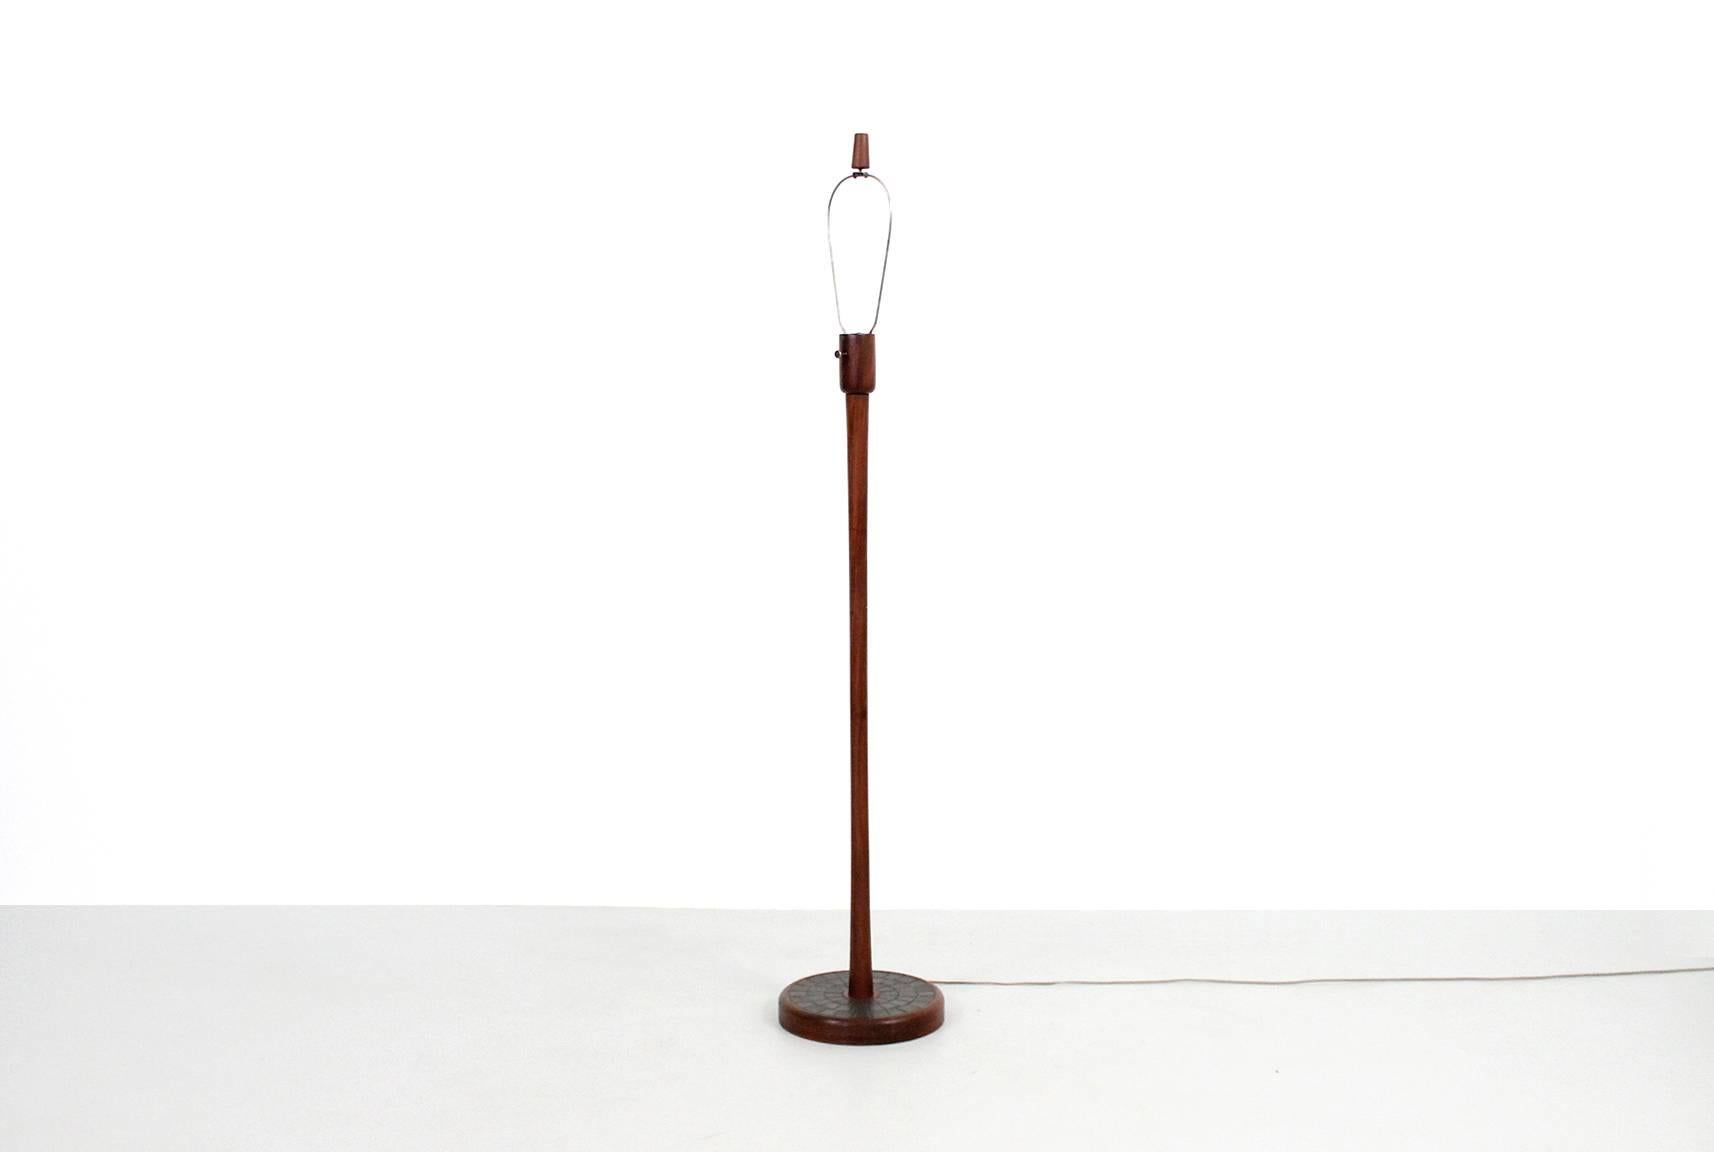 Jane and Gordon Martz for Marshall Studios walnut floor lamp with graphic ceramic tile detail on base. Dimensions below are with shade pictured. Shade not included.
    